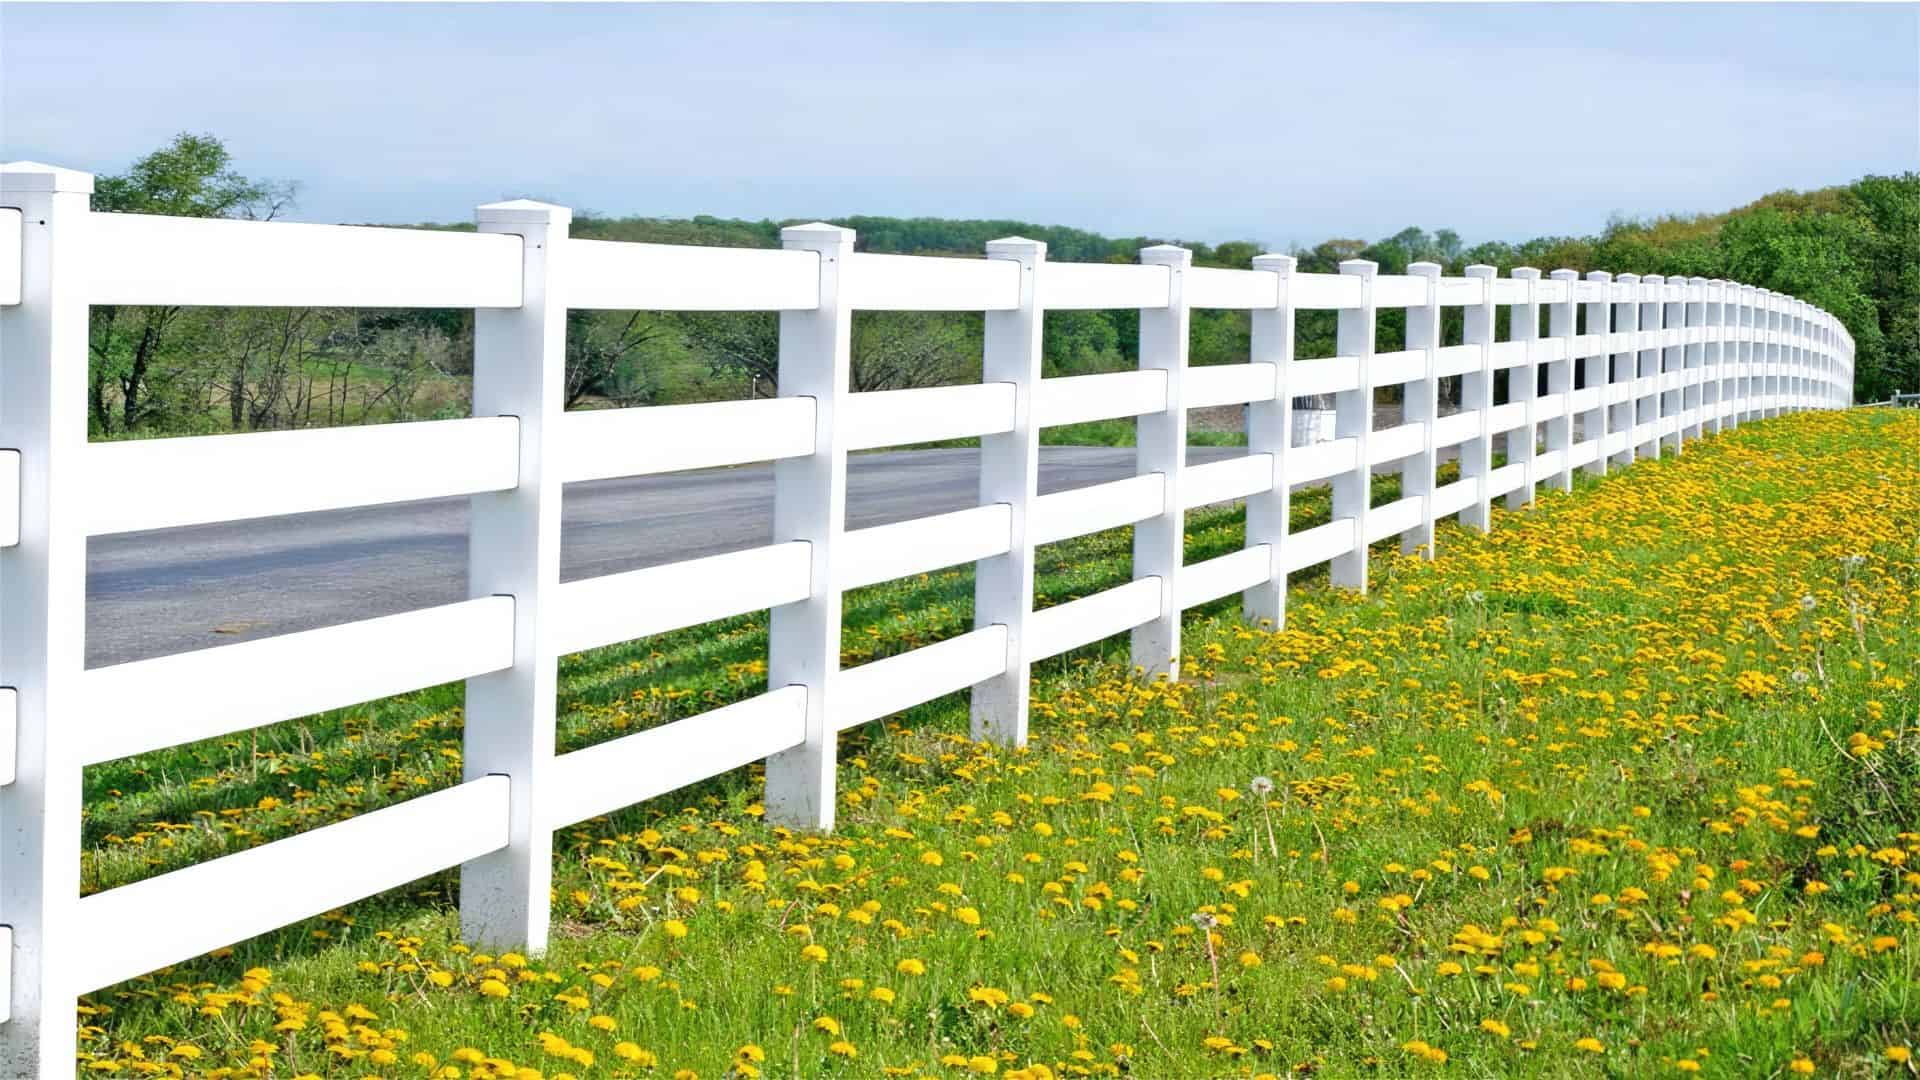 Vinyl 4-rail ranch fence amidst rural beauty: Open flower field with trees in the background. Serene countryside scene.